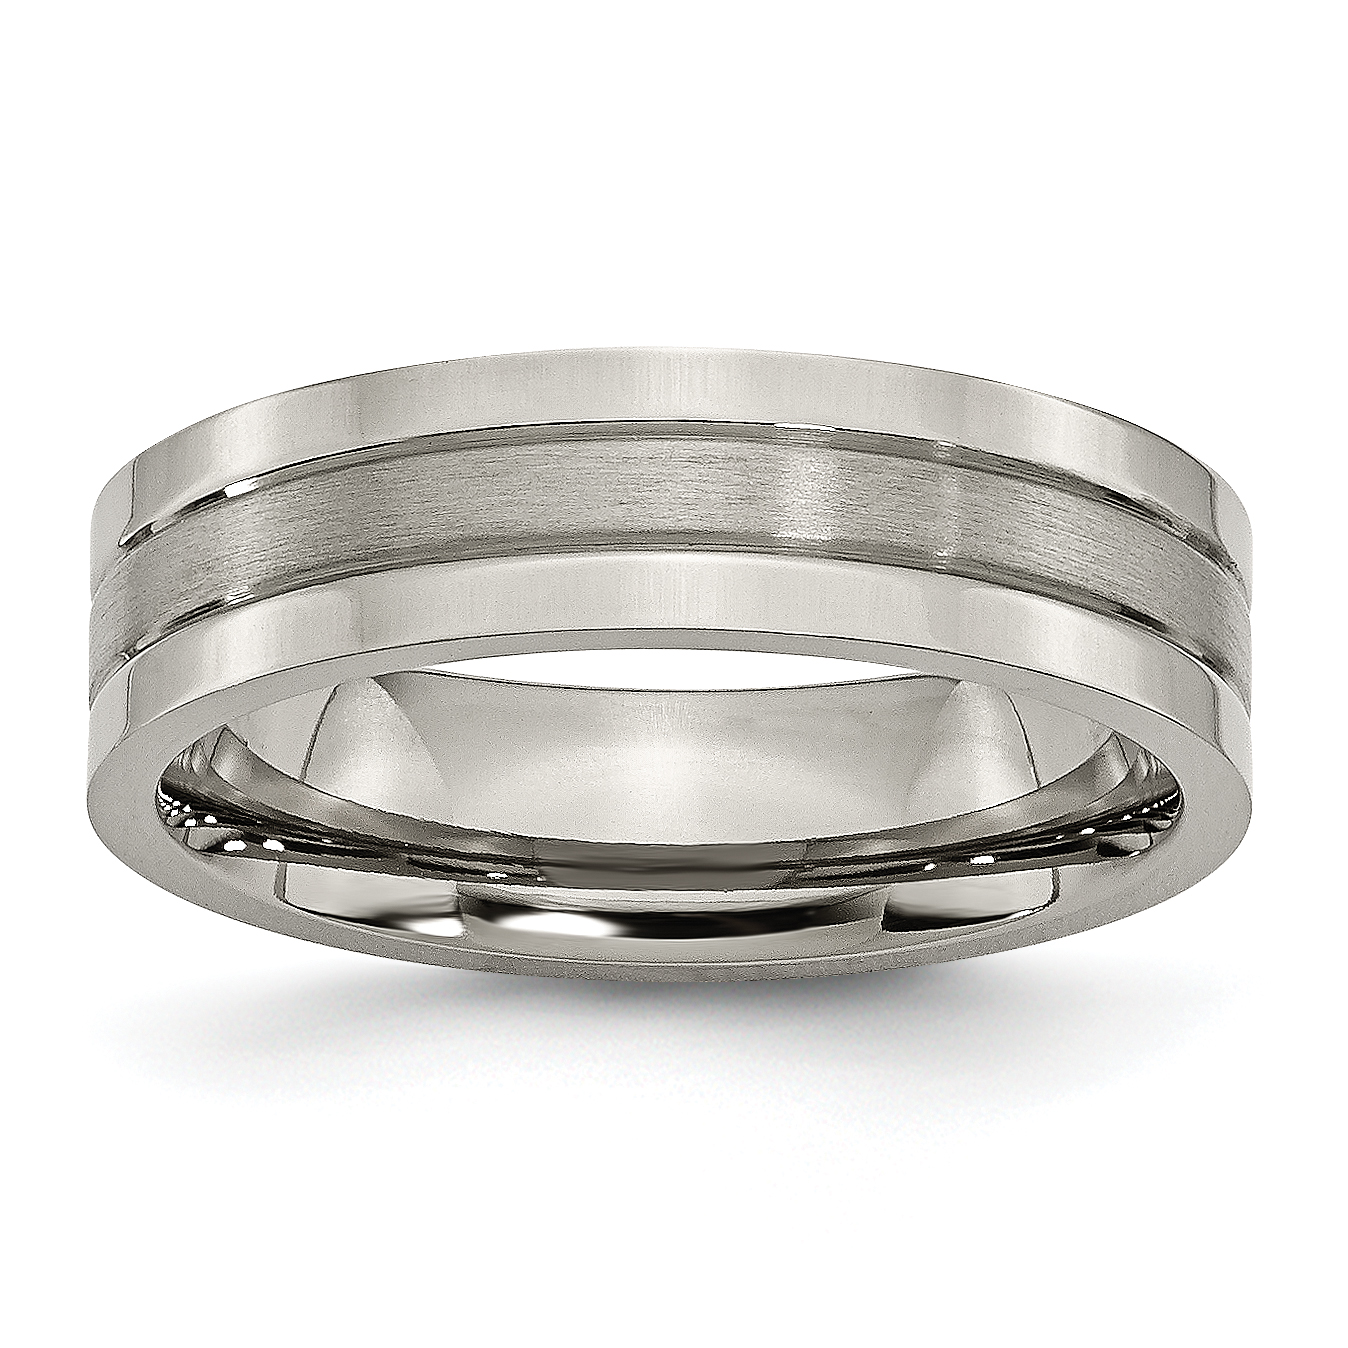 Wedding Bands USA Titanium Grooved 6mm Brushed and Polished Band